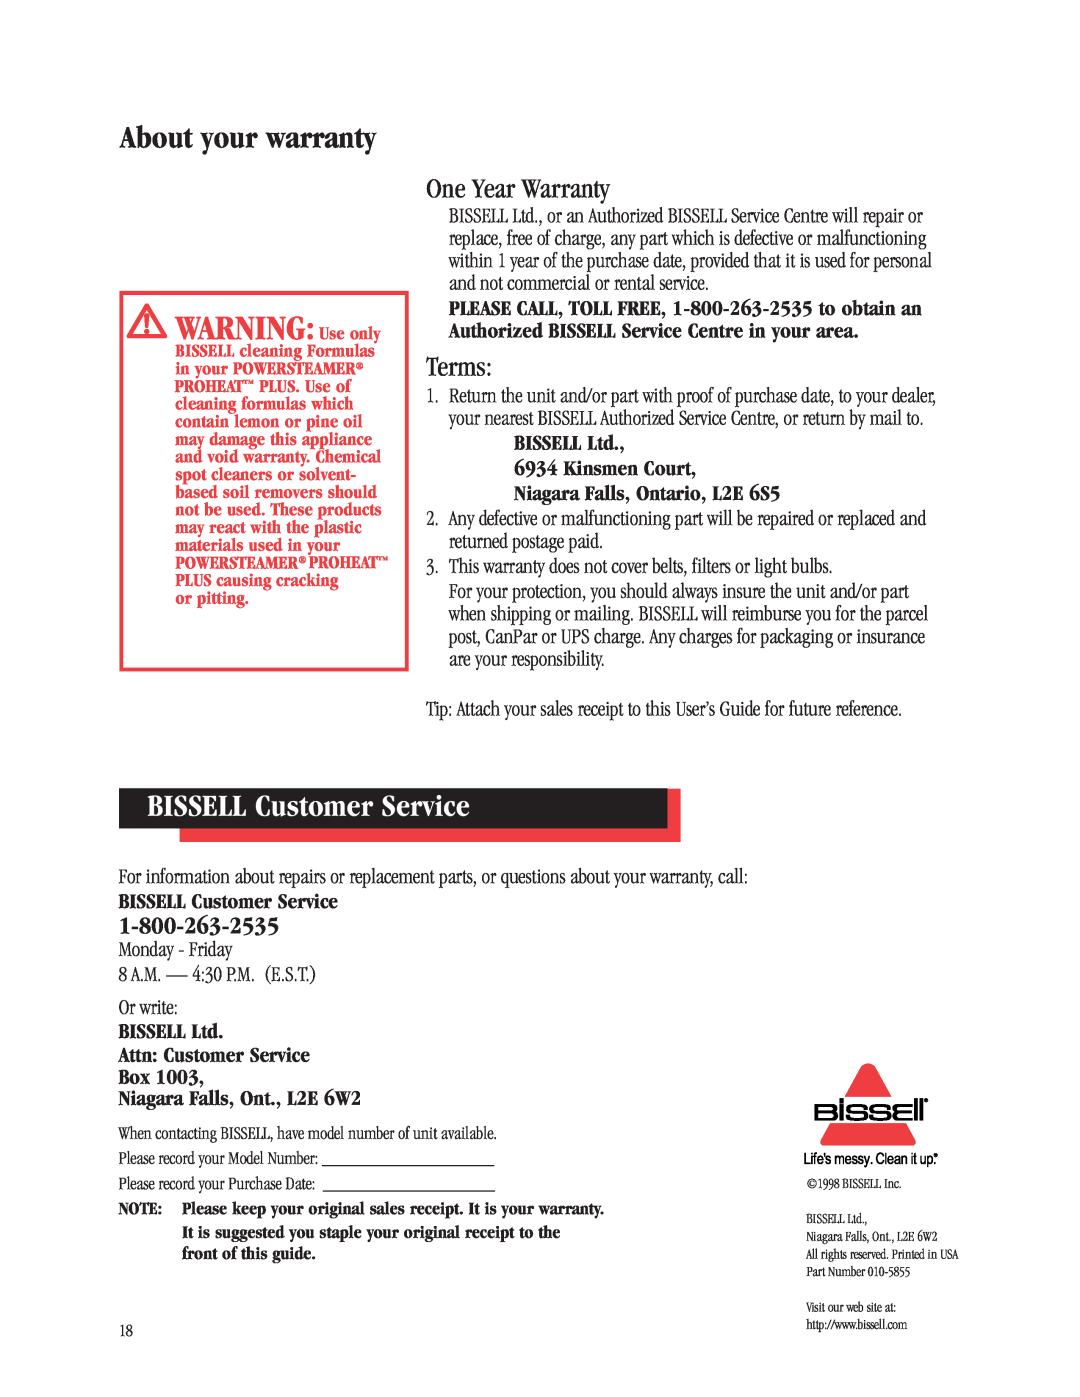 Bissell 1698 About your warranty, BISSELL Customer Service, One Year Warranty, Terms, WARNING Use only 